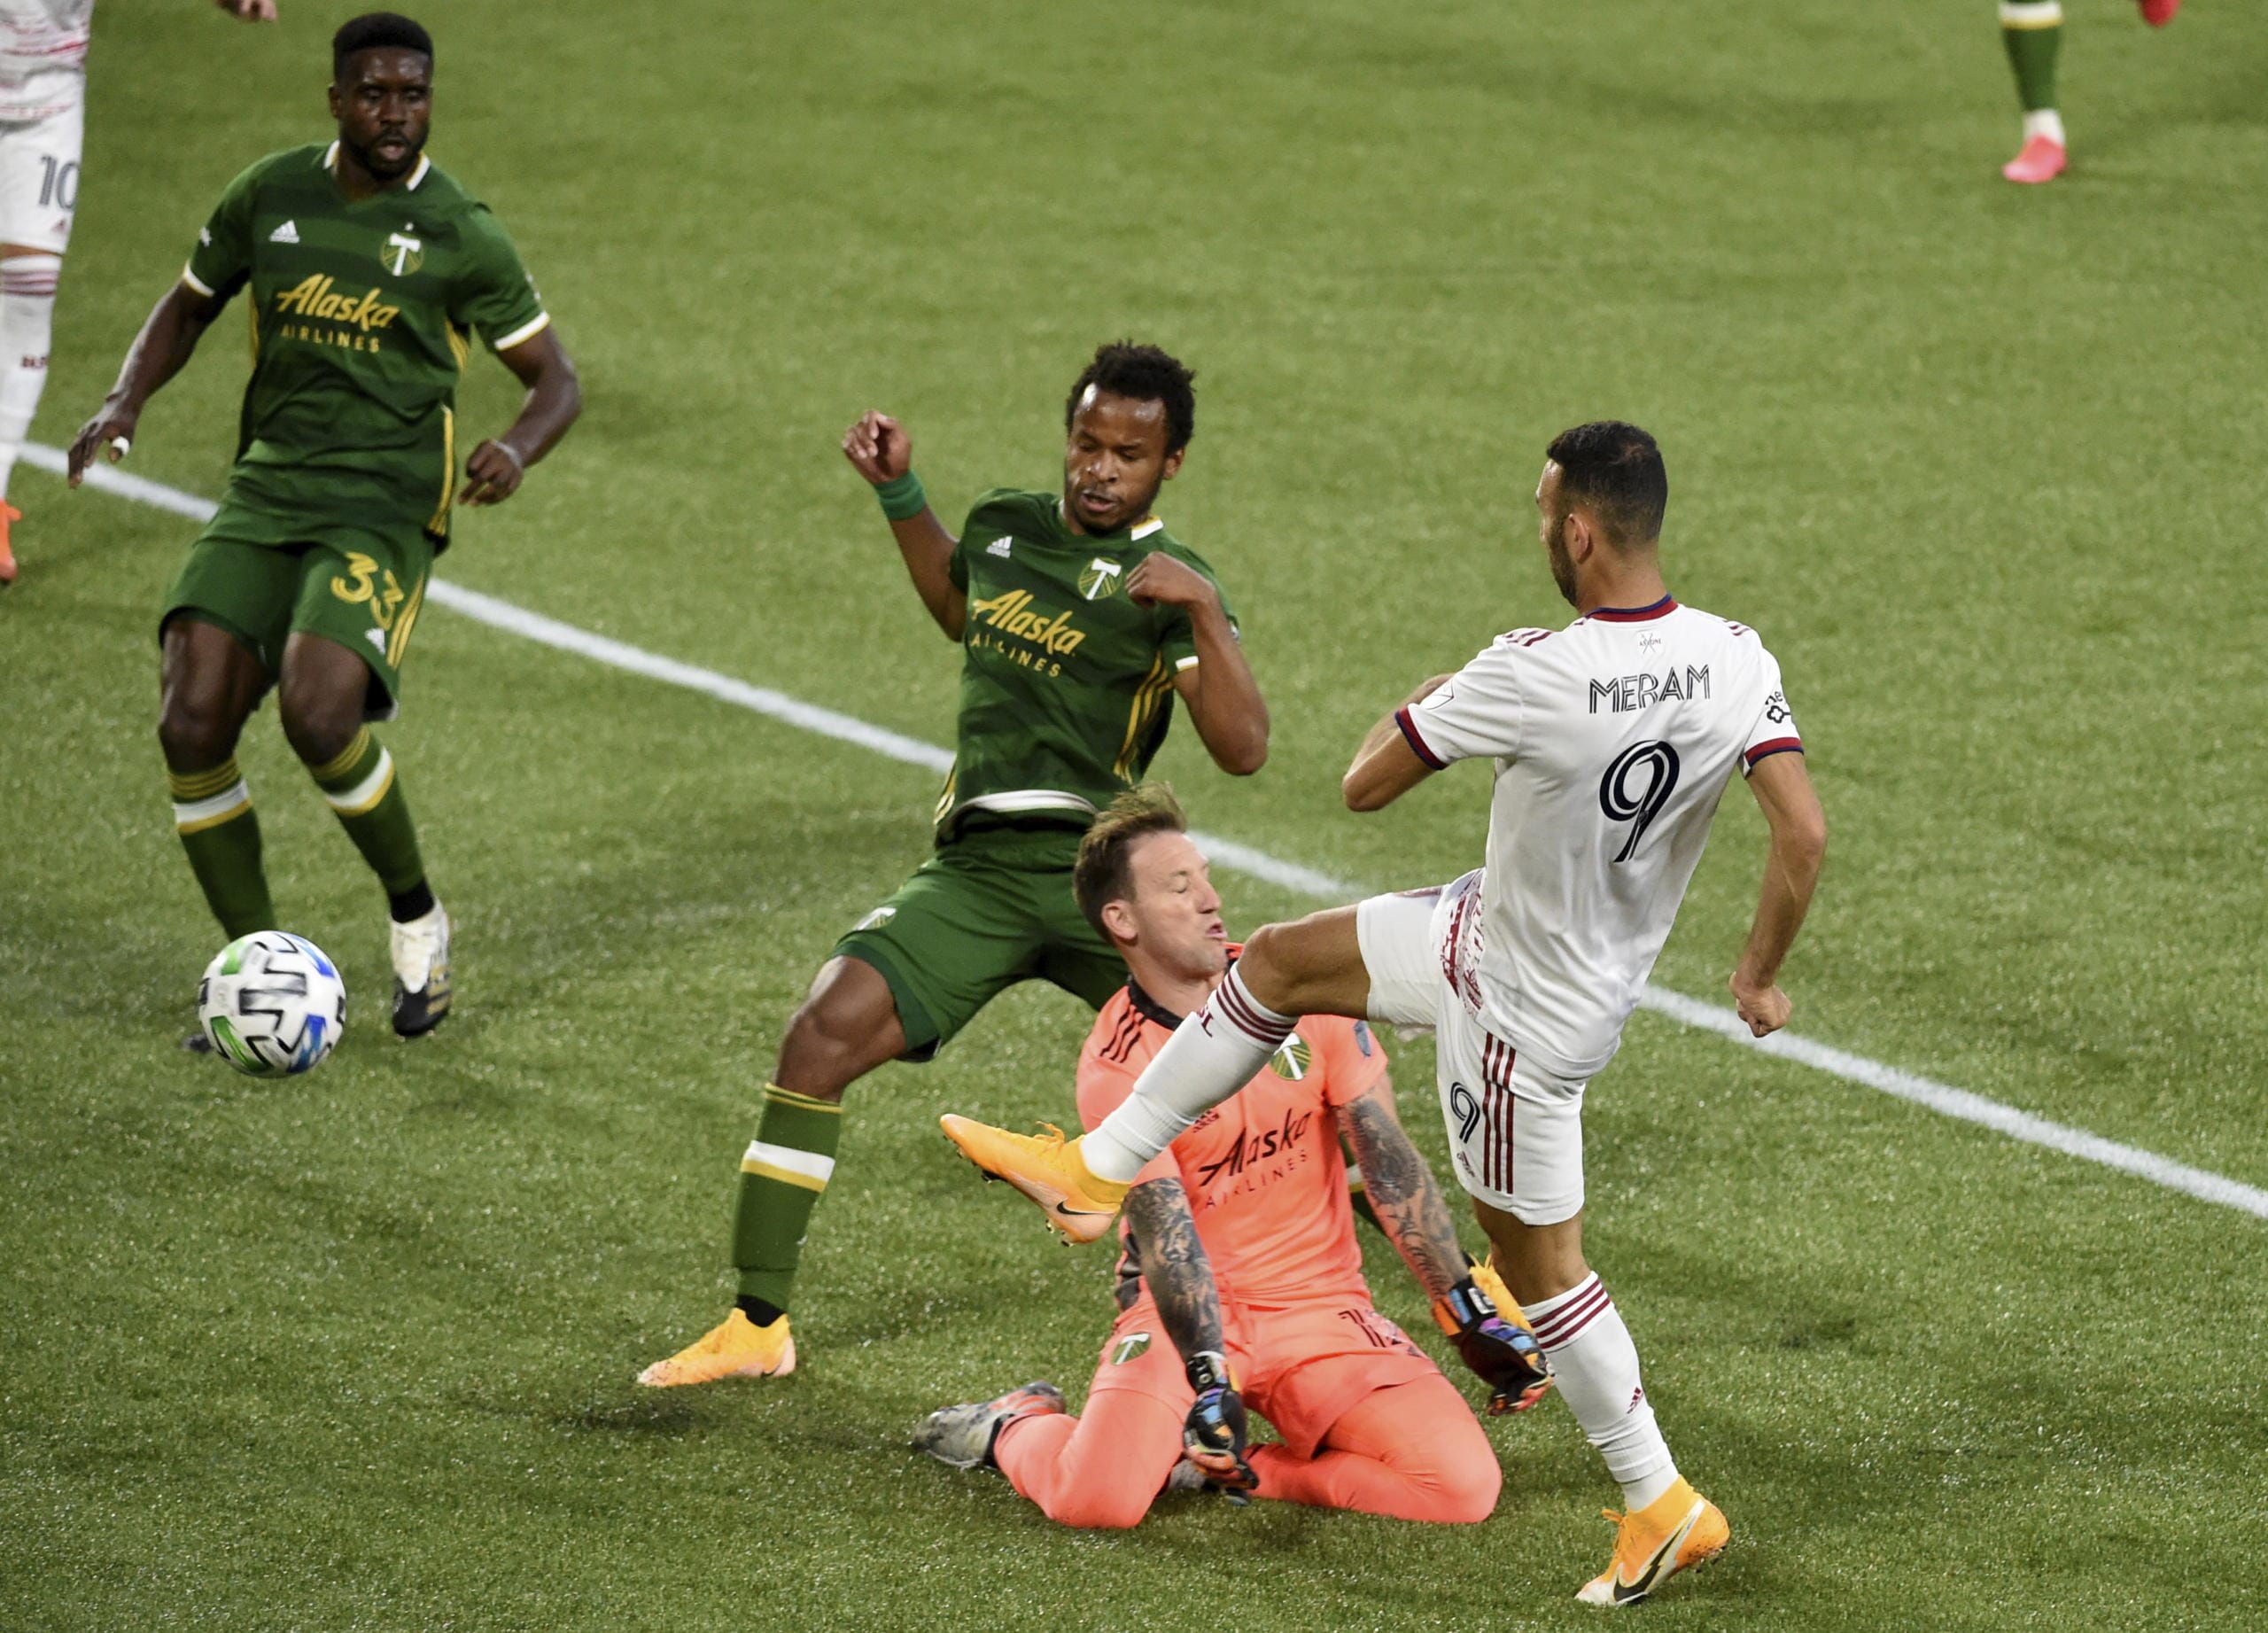 Real Salt Lake forward Justin Meram, right puts a shot on goal as Portland Timbers goalkeeper Steve Clark and forward Jeremy Ebobisse, center, defend and Timbers defender Larrys Mabiala looks at the ball at his feet during the first half of an MLS soccer match in Portland, Ore., Saturday, Aug. 29, 2020.